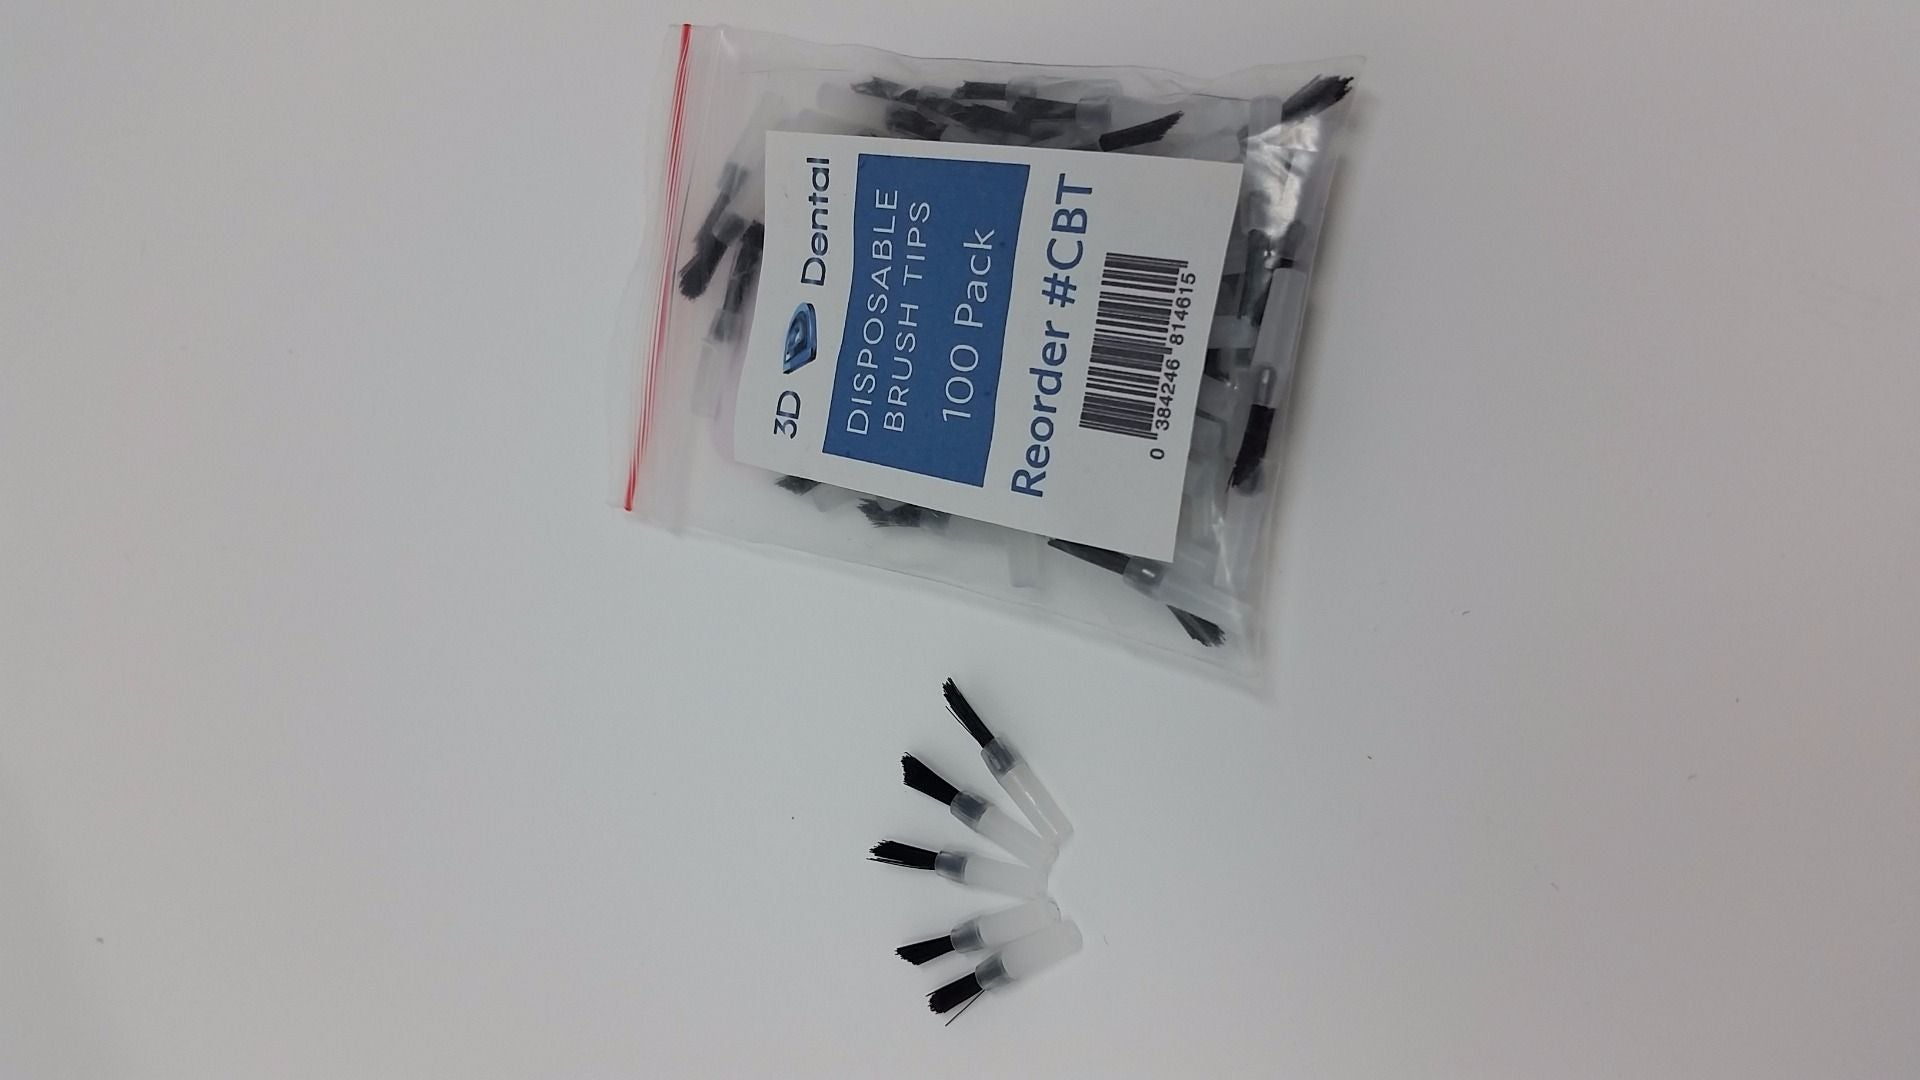 Disposable Composite Brush Tips